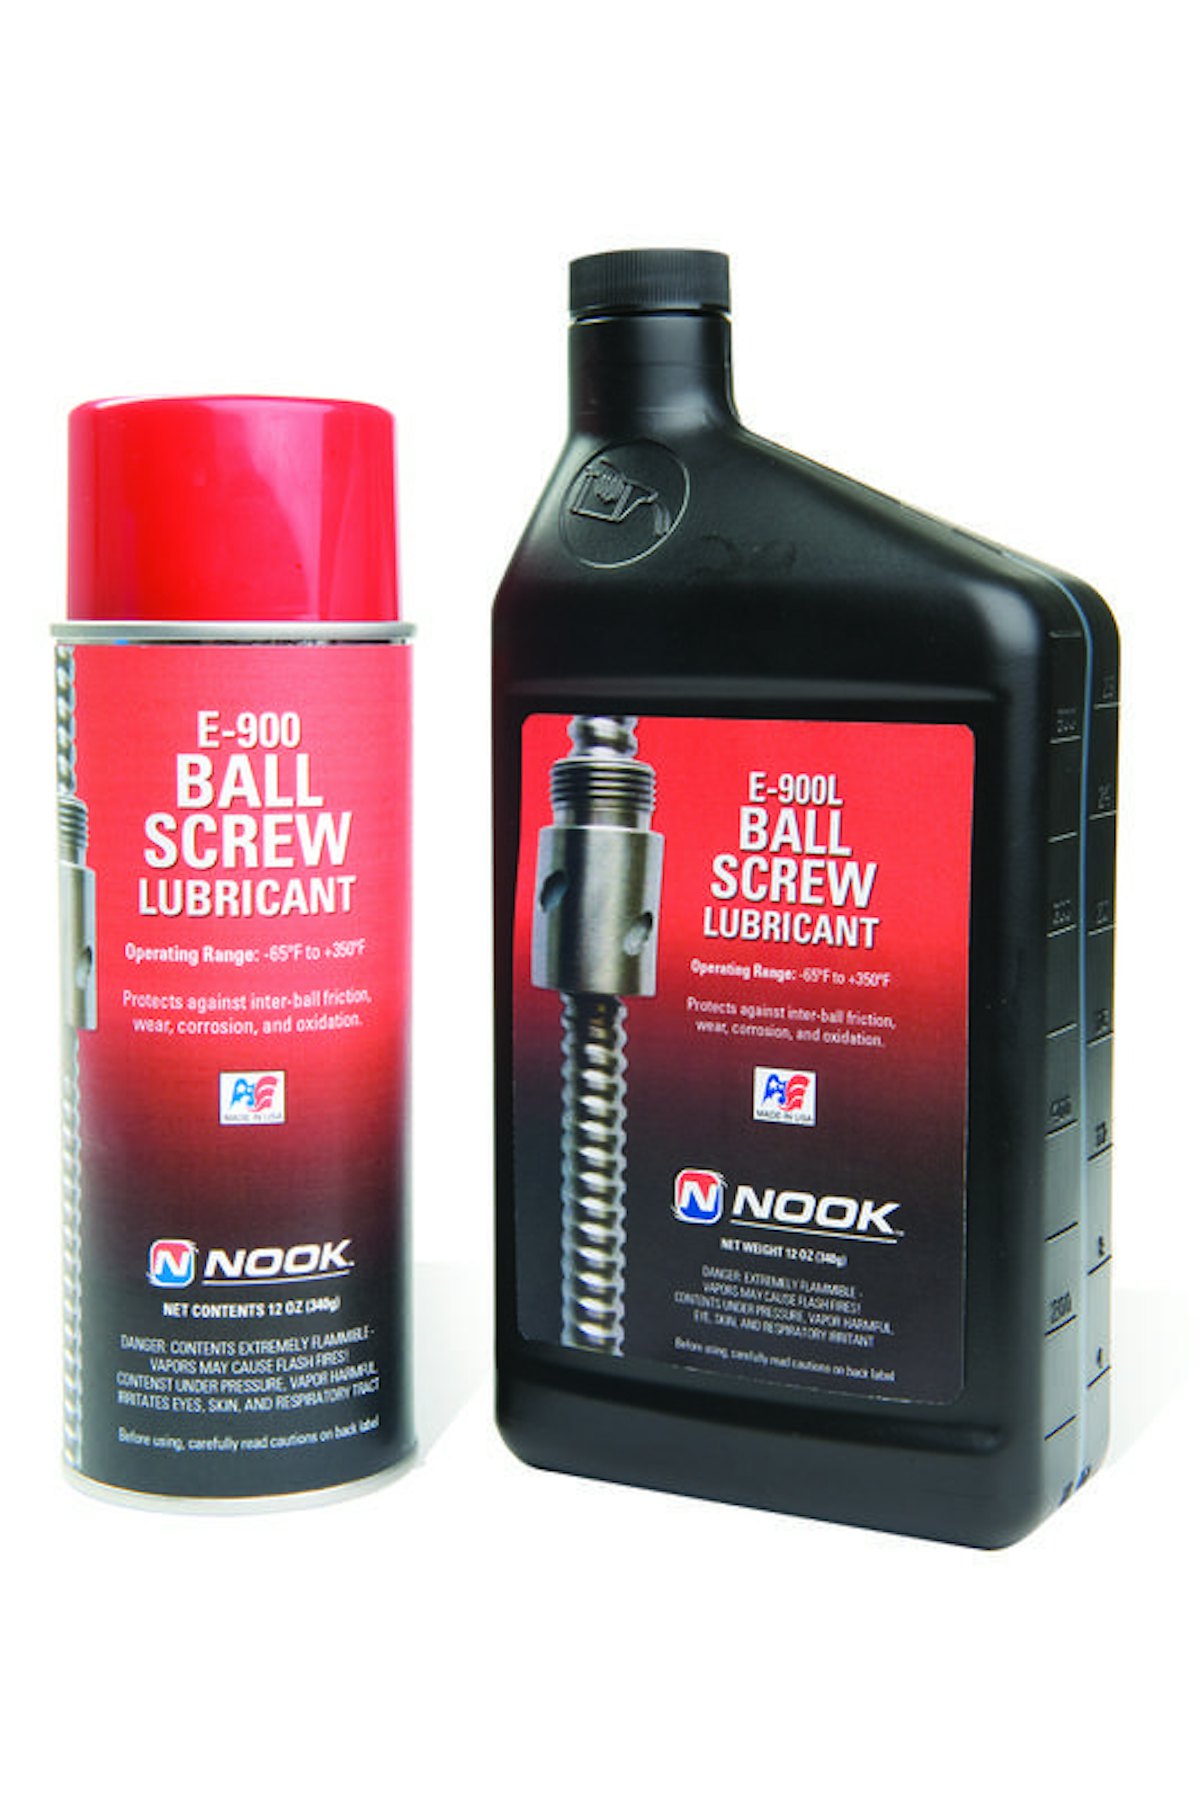 https://img.inddist.com/files/base/indm/all/image/2015/06/id_7567_ball_screw_lube_1__4x6.png?auto=format%2Ccompress&fit=max&q=70&w=1200